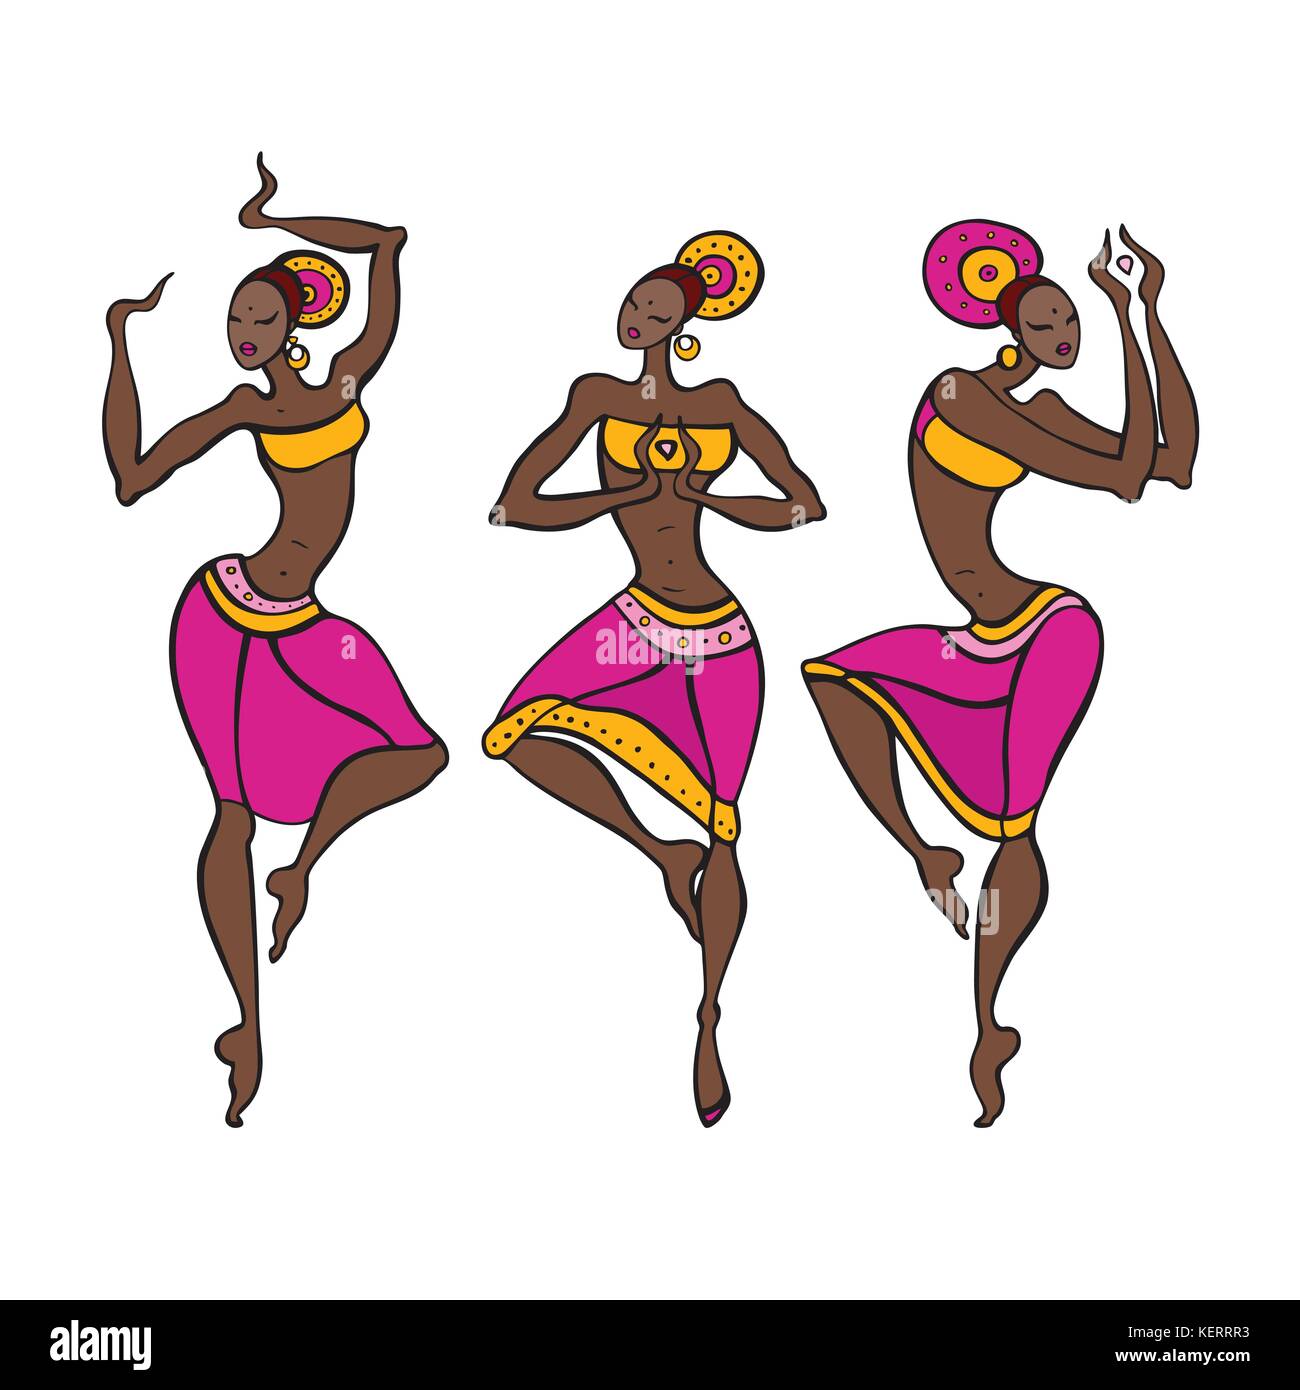 Dancing woman in ethnic style. Stock Vector